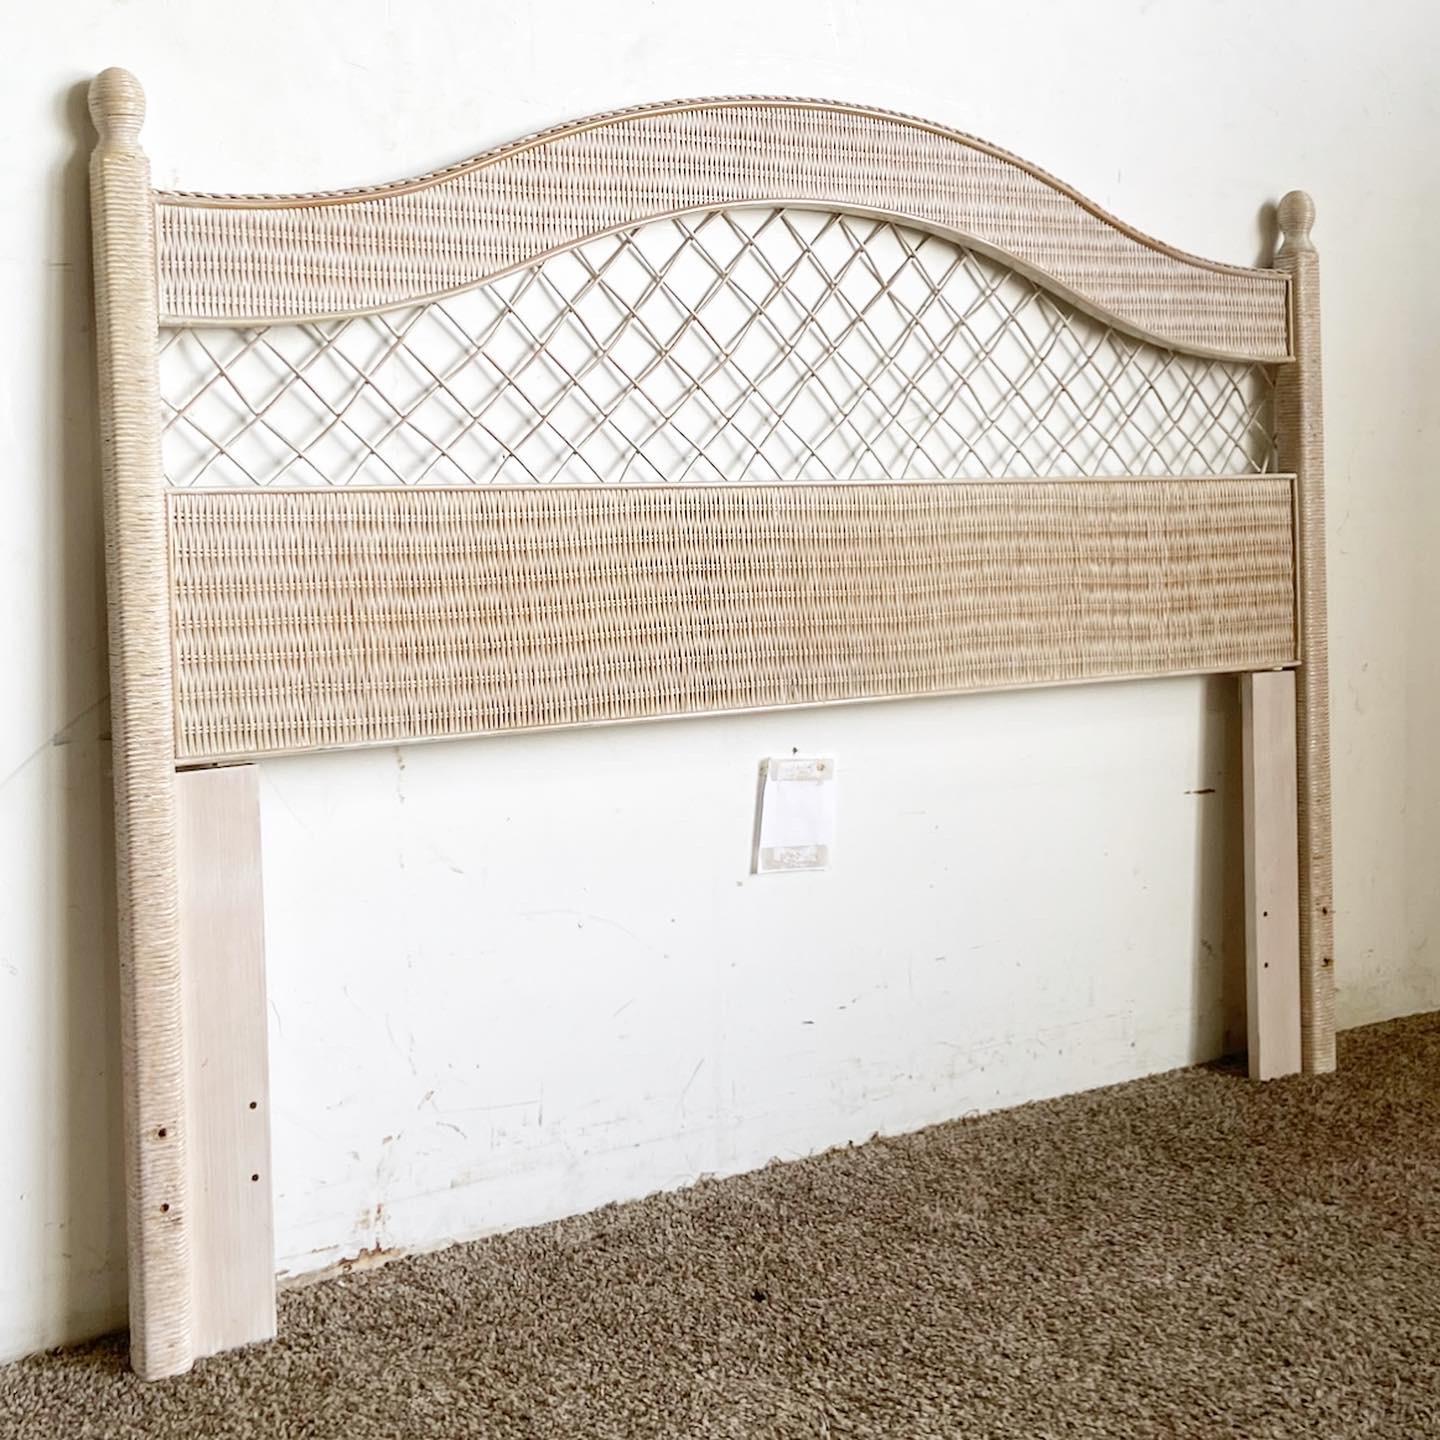 Elevate your bedroom with the Boho Chic Rattan Wicker Queen Headboard by Henry Link. Crafted with intricate weaving, it's the epitome of natural elegance.
Minor wear as seen in the photos.